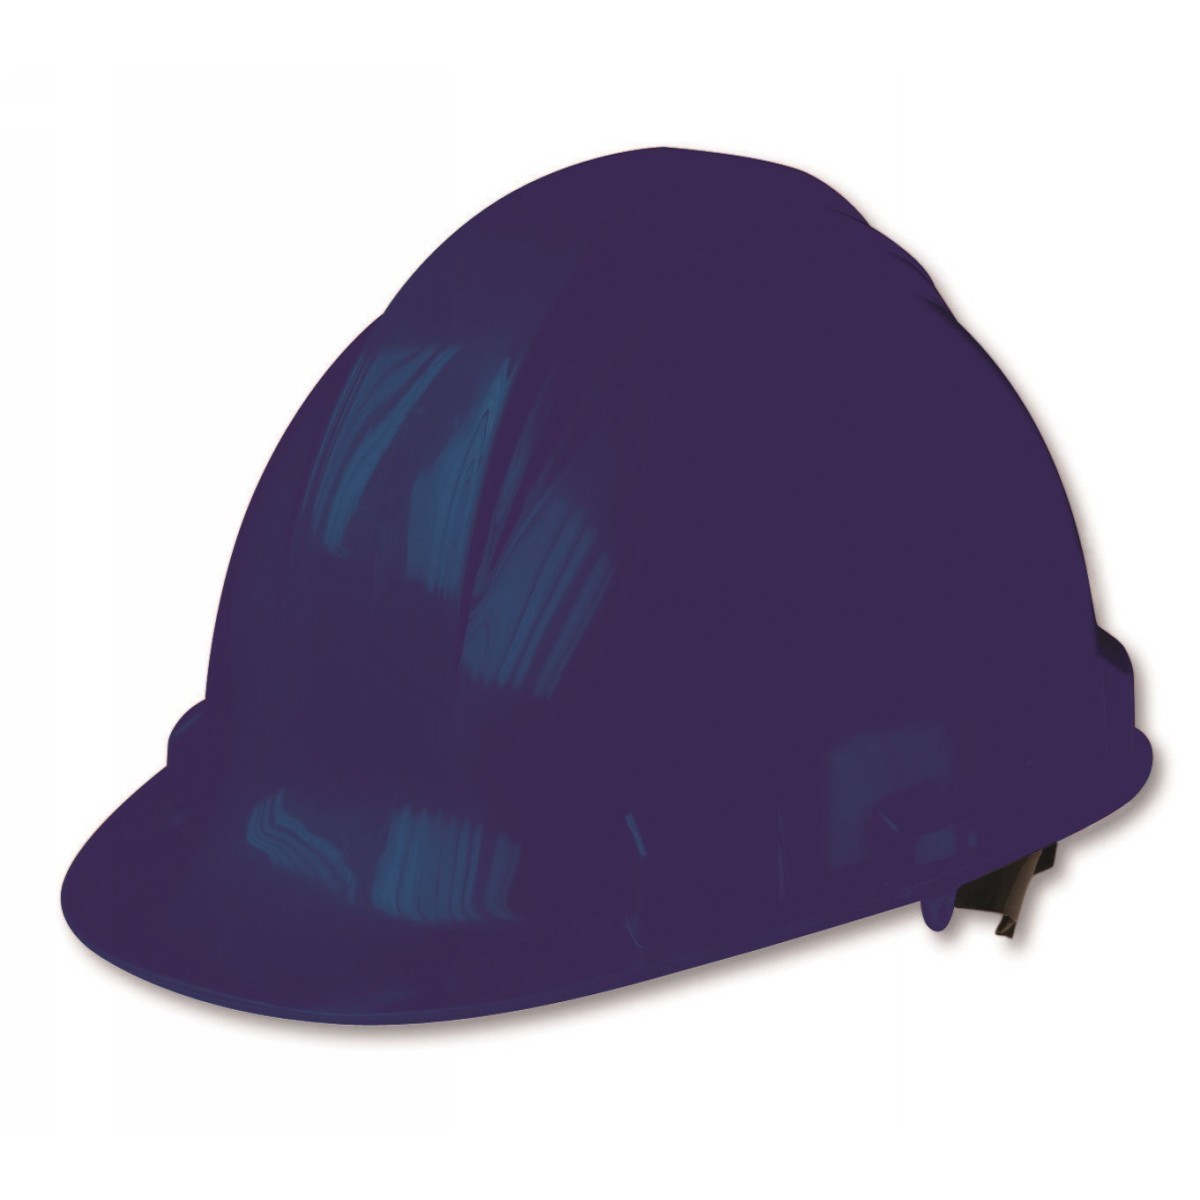 Honeywell Royal Blue North® Peak A79 HDPE Cap Style Hard Hat With Rachet/4 Point Ratchet Suspension